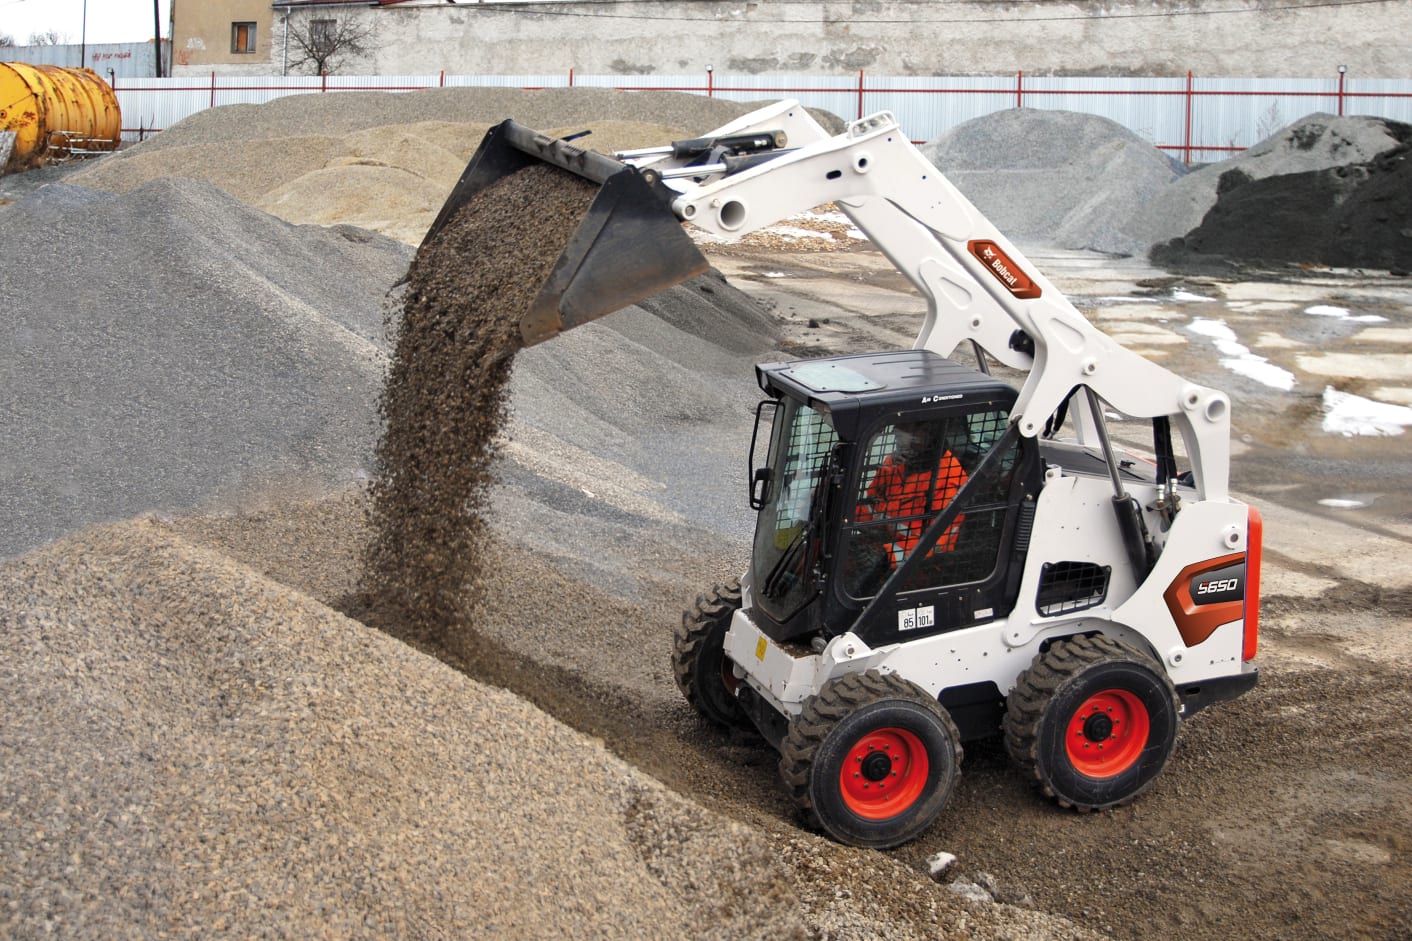 Browse Specs and more for the S650 Skid-Steer Loader - Bobcat of the Rockies